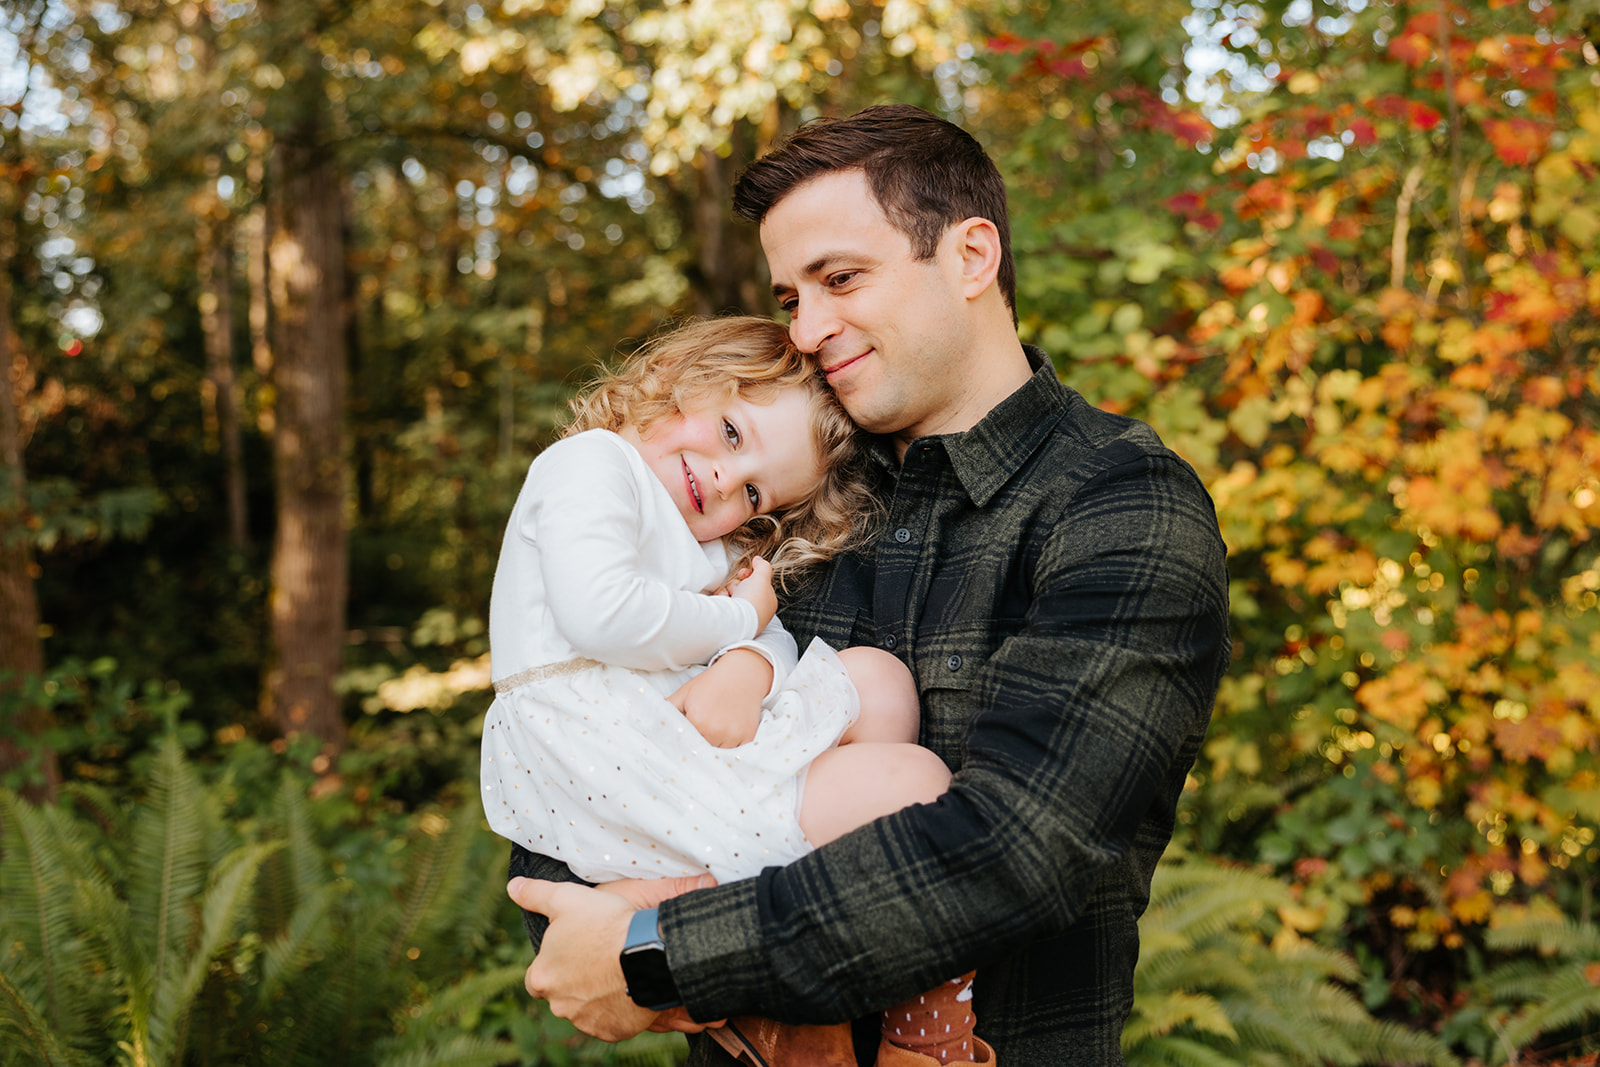 A close-up candid photo of a father holding his daughter in his arms in front of colorful fall foliage in Seattle.